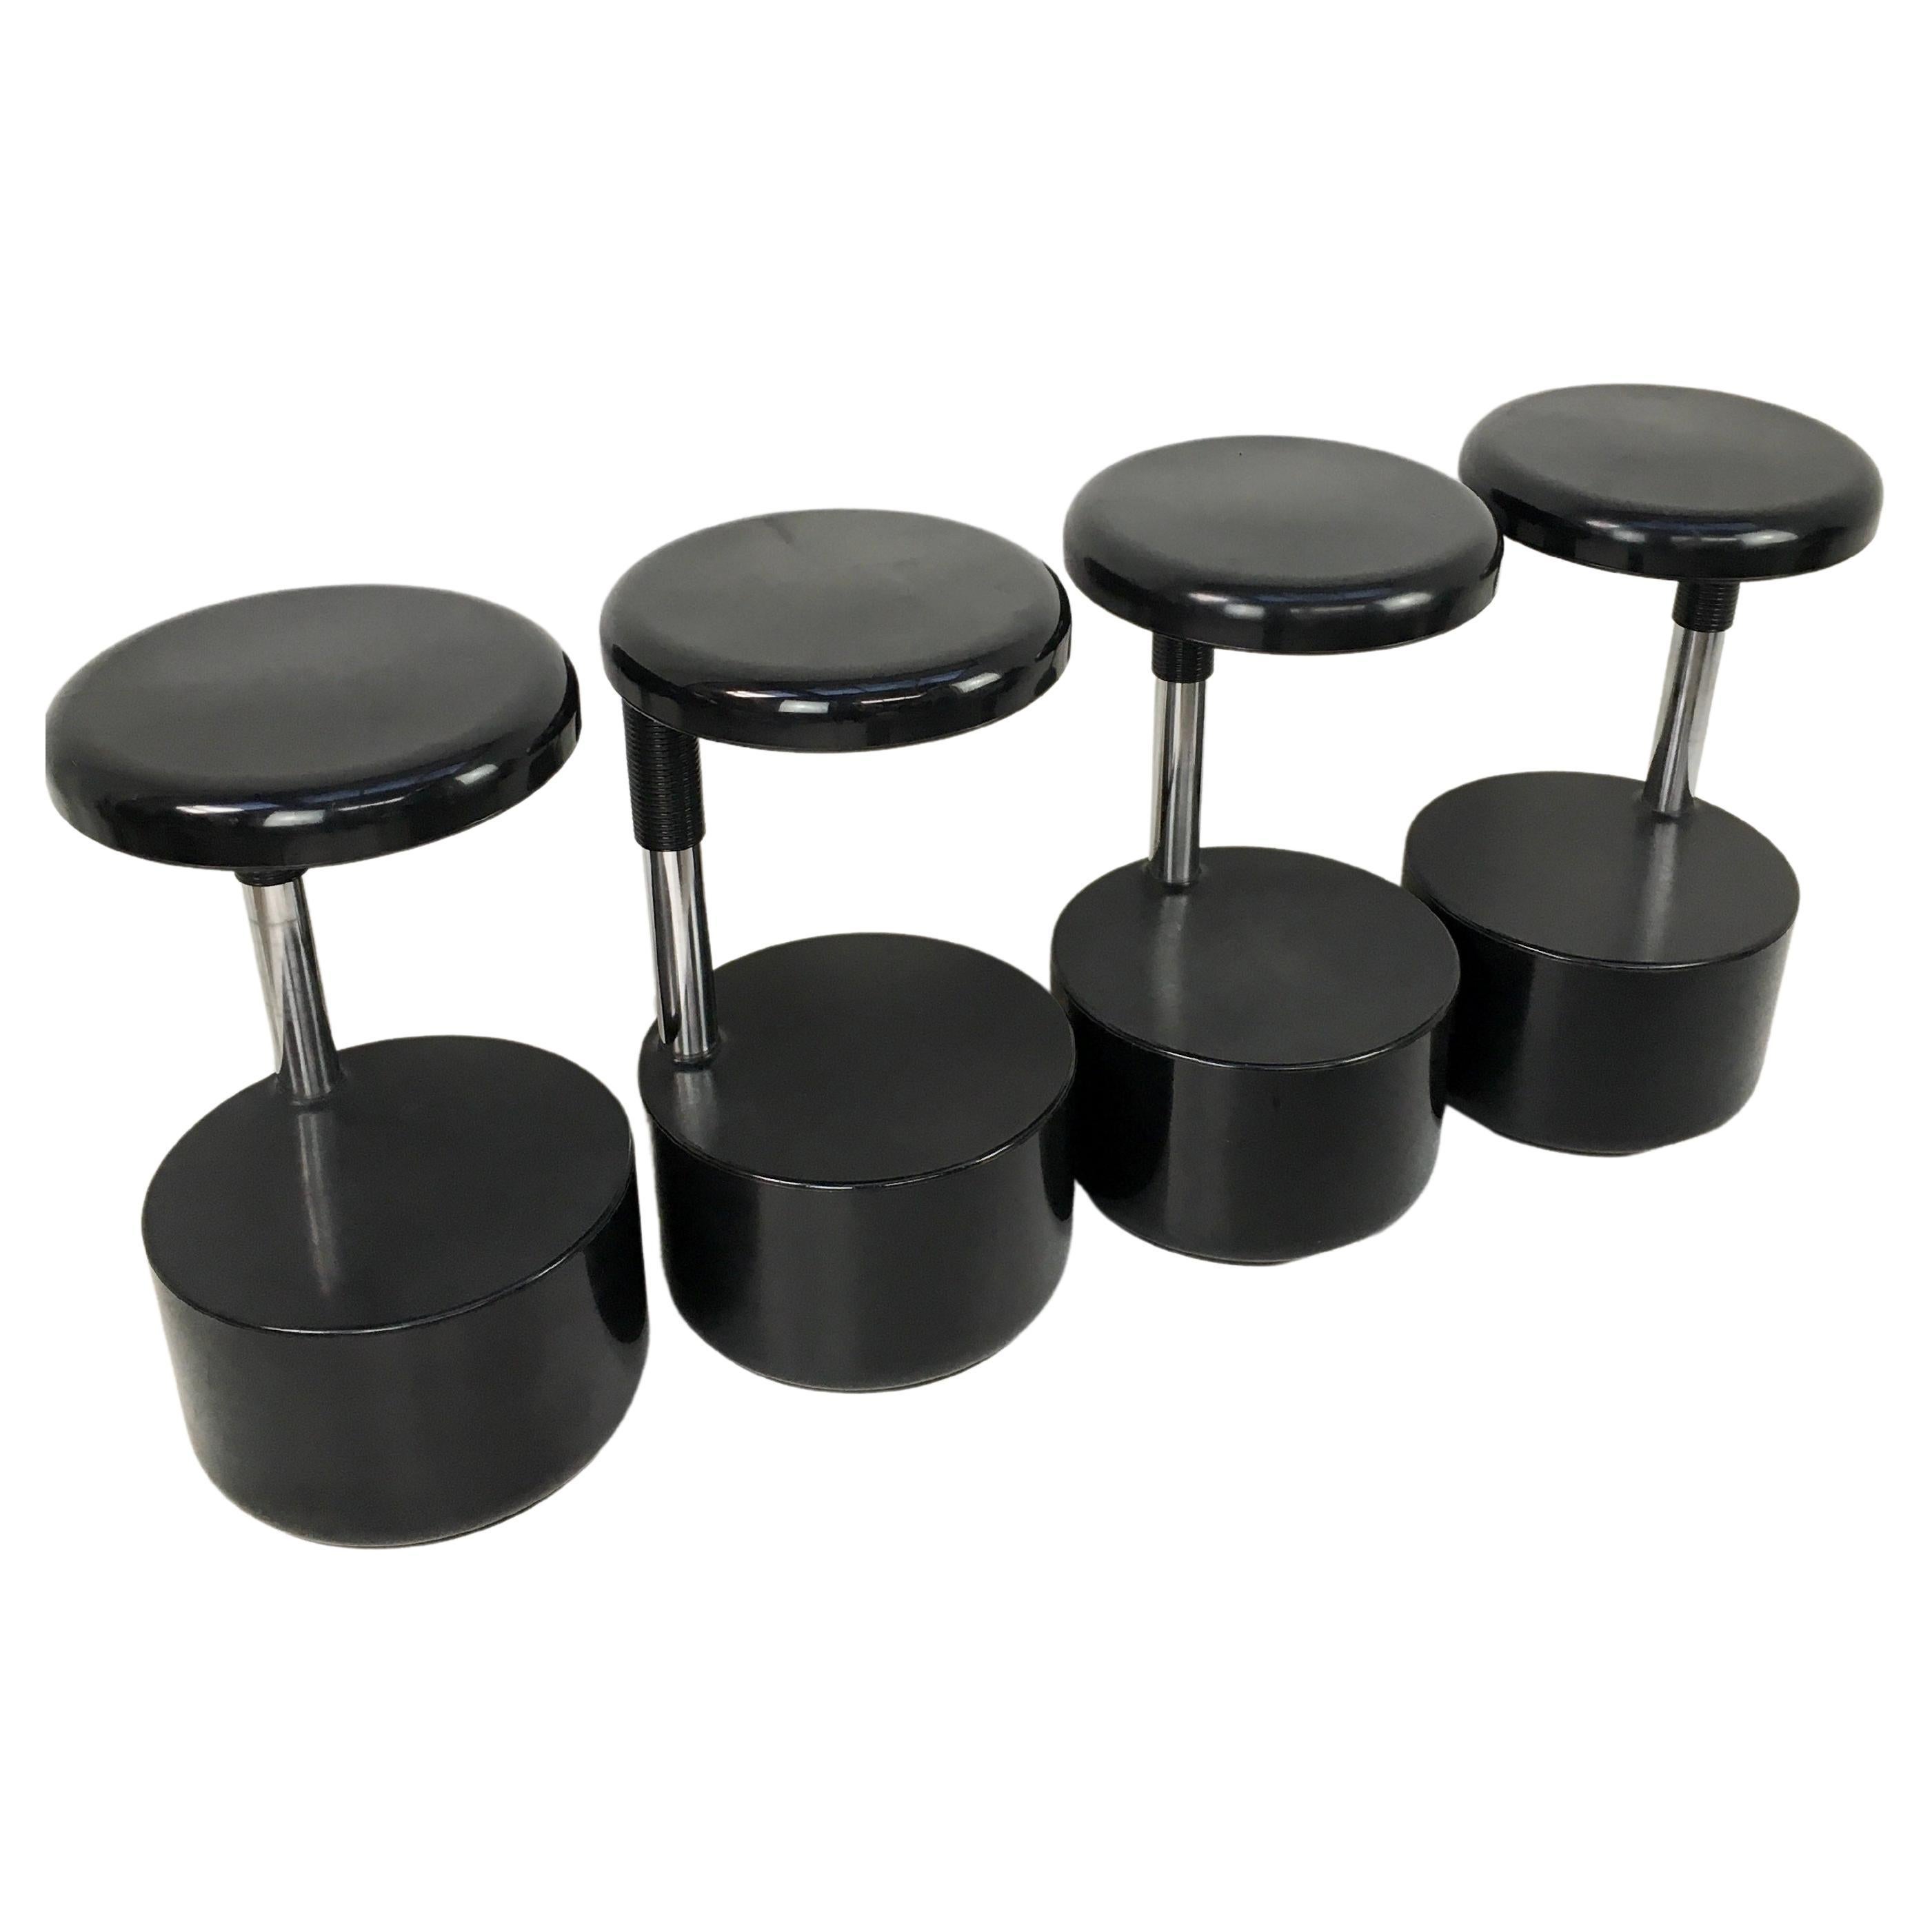 Italian design, set of four black ‘Golf’ bar stools. Designed by Roberto Lucci and Paolo Orlandini for Velca Legnano. 

They have a clever height adjustment hidden under seat. Seat height range is 60cm to 74cm. 

Labels intact under seats. 

Made in